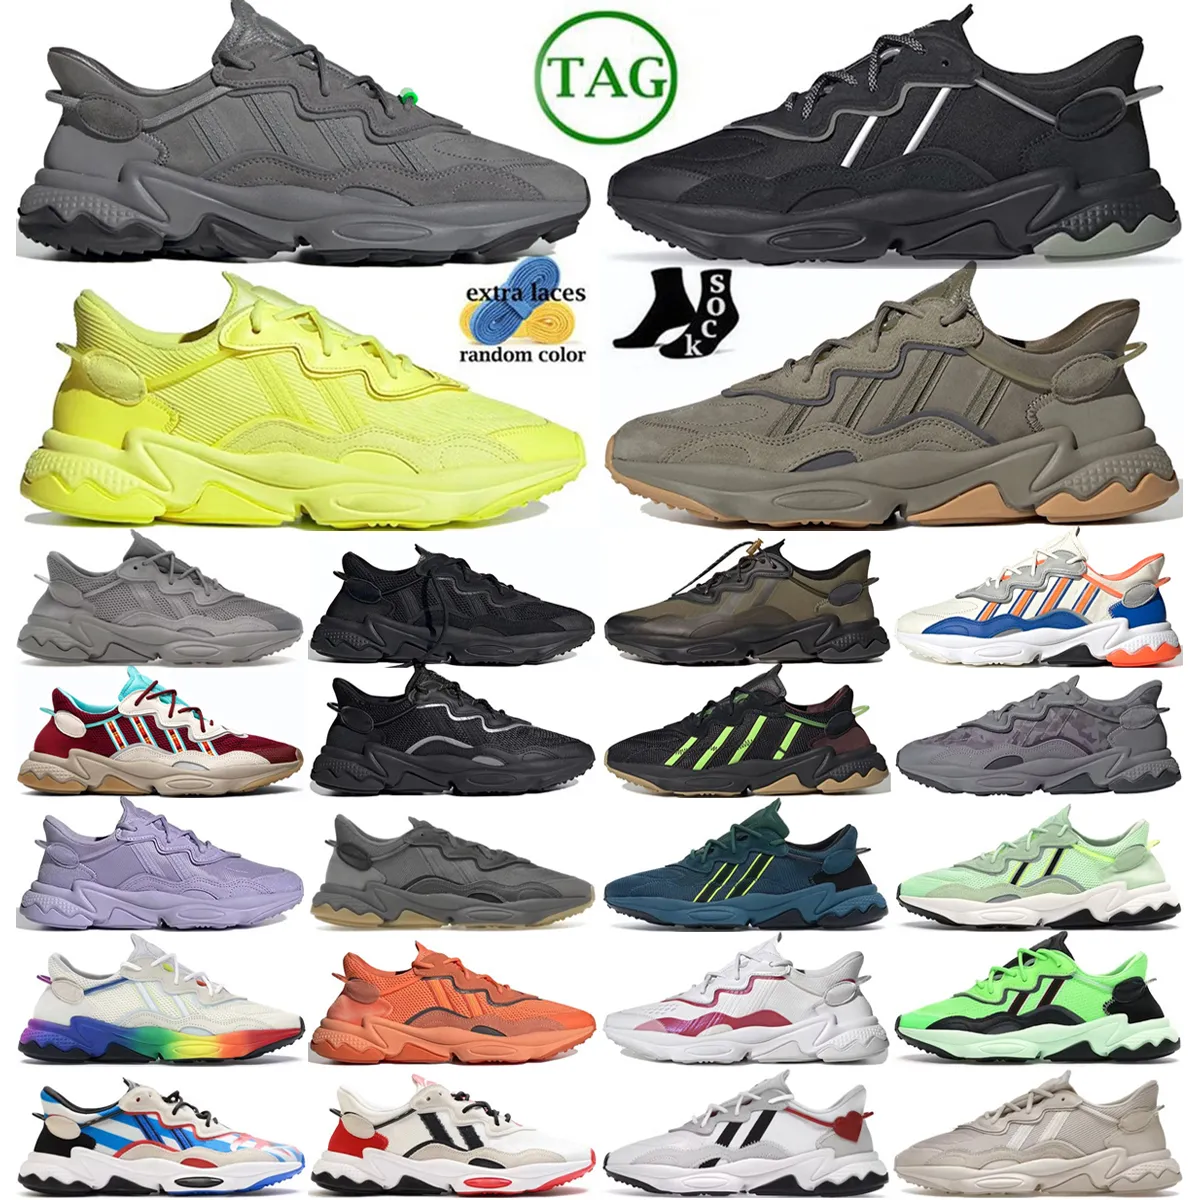 ozweego trainers Grey Solar Green Black Silver Metallic Frozen Yellow Five Gum Trace Cargo Pale Nude Chalk Pearl Bliss Knit Valentine's Day Pusha T Running Shoes